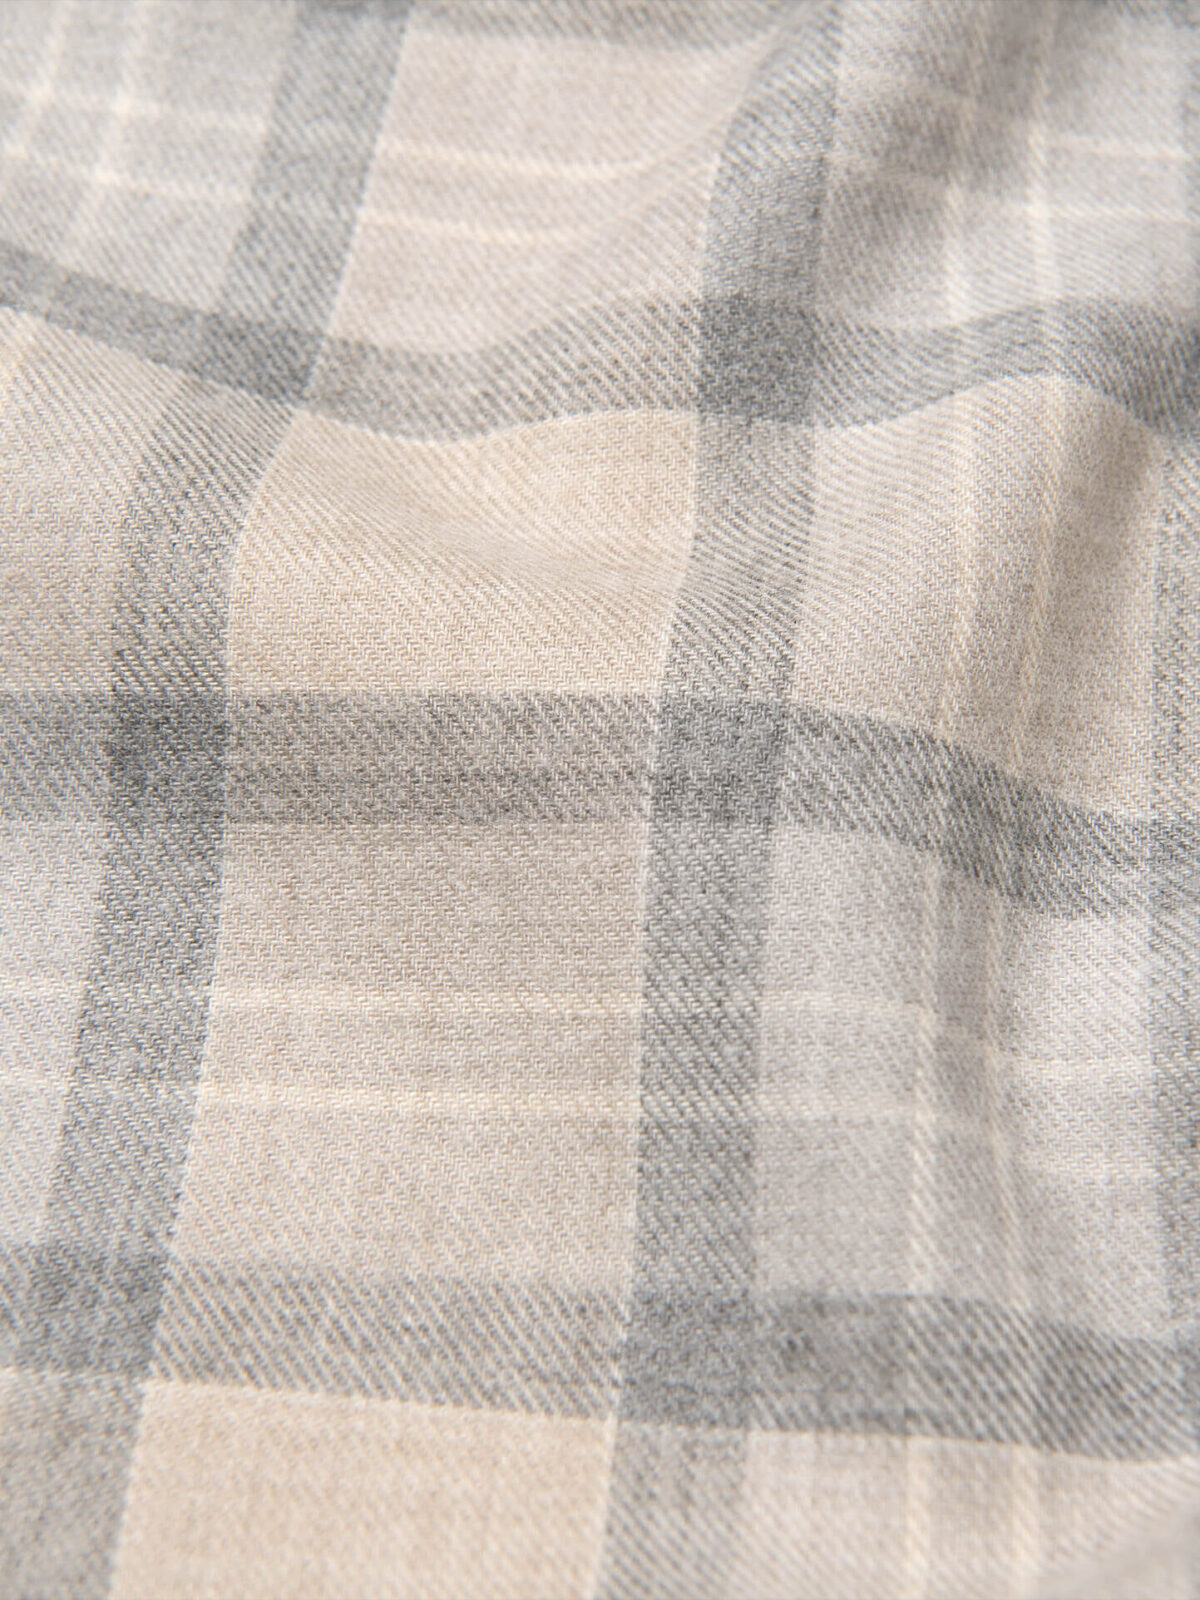 Flannel Plaid Red White Gray Yellow Taupe 58 Wide Cotton Flannel Fabric by  the Yard (D275.